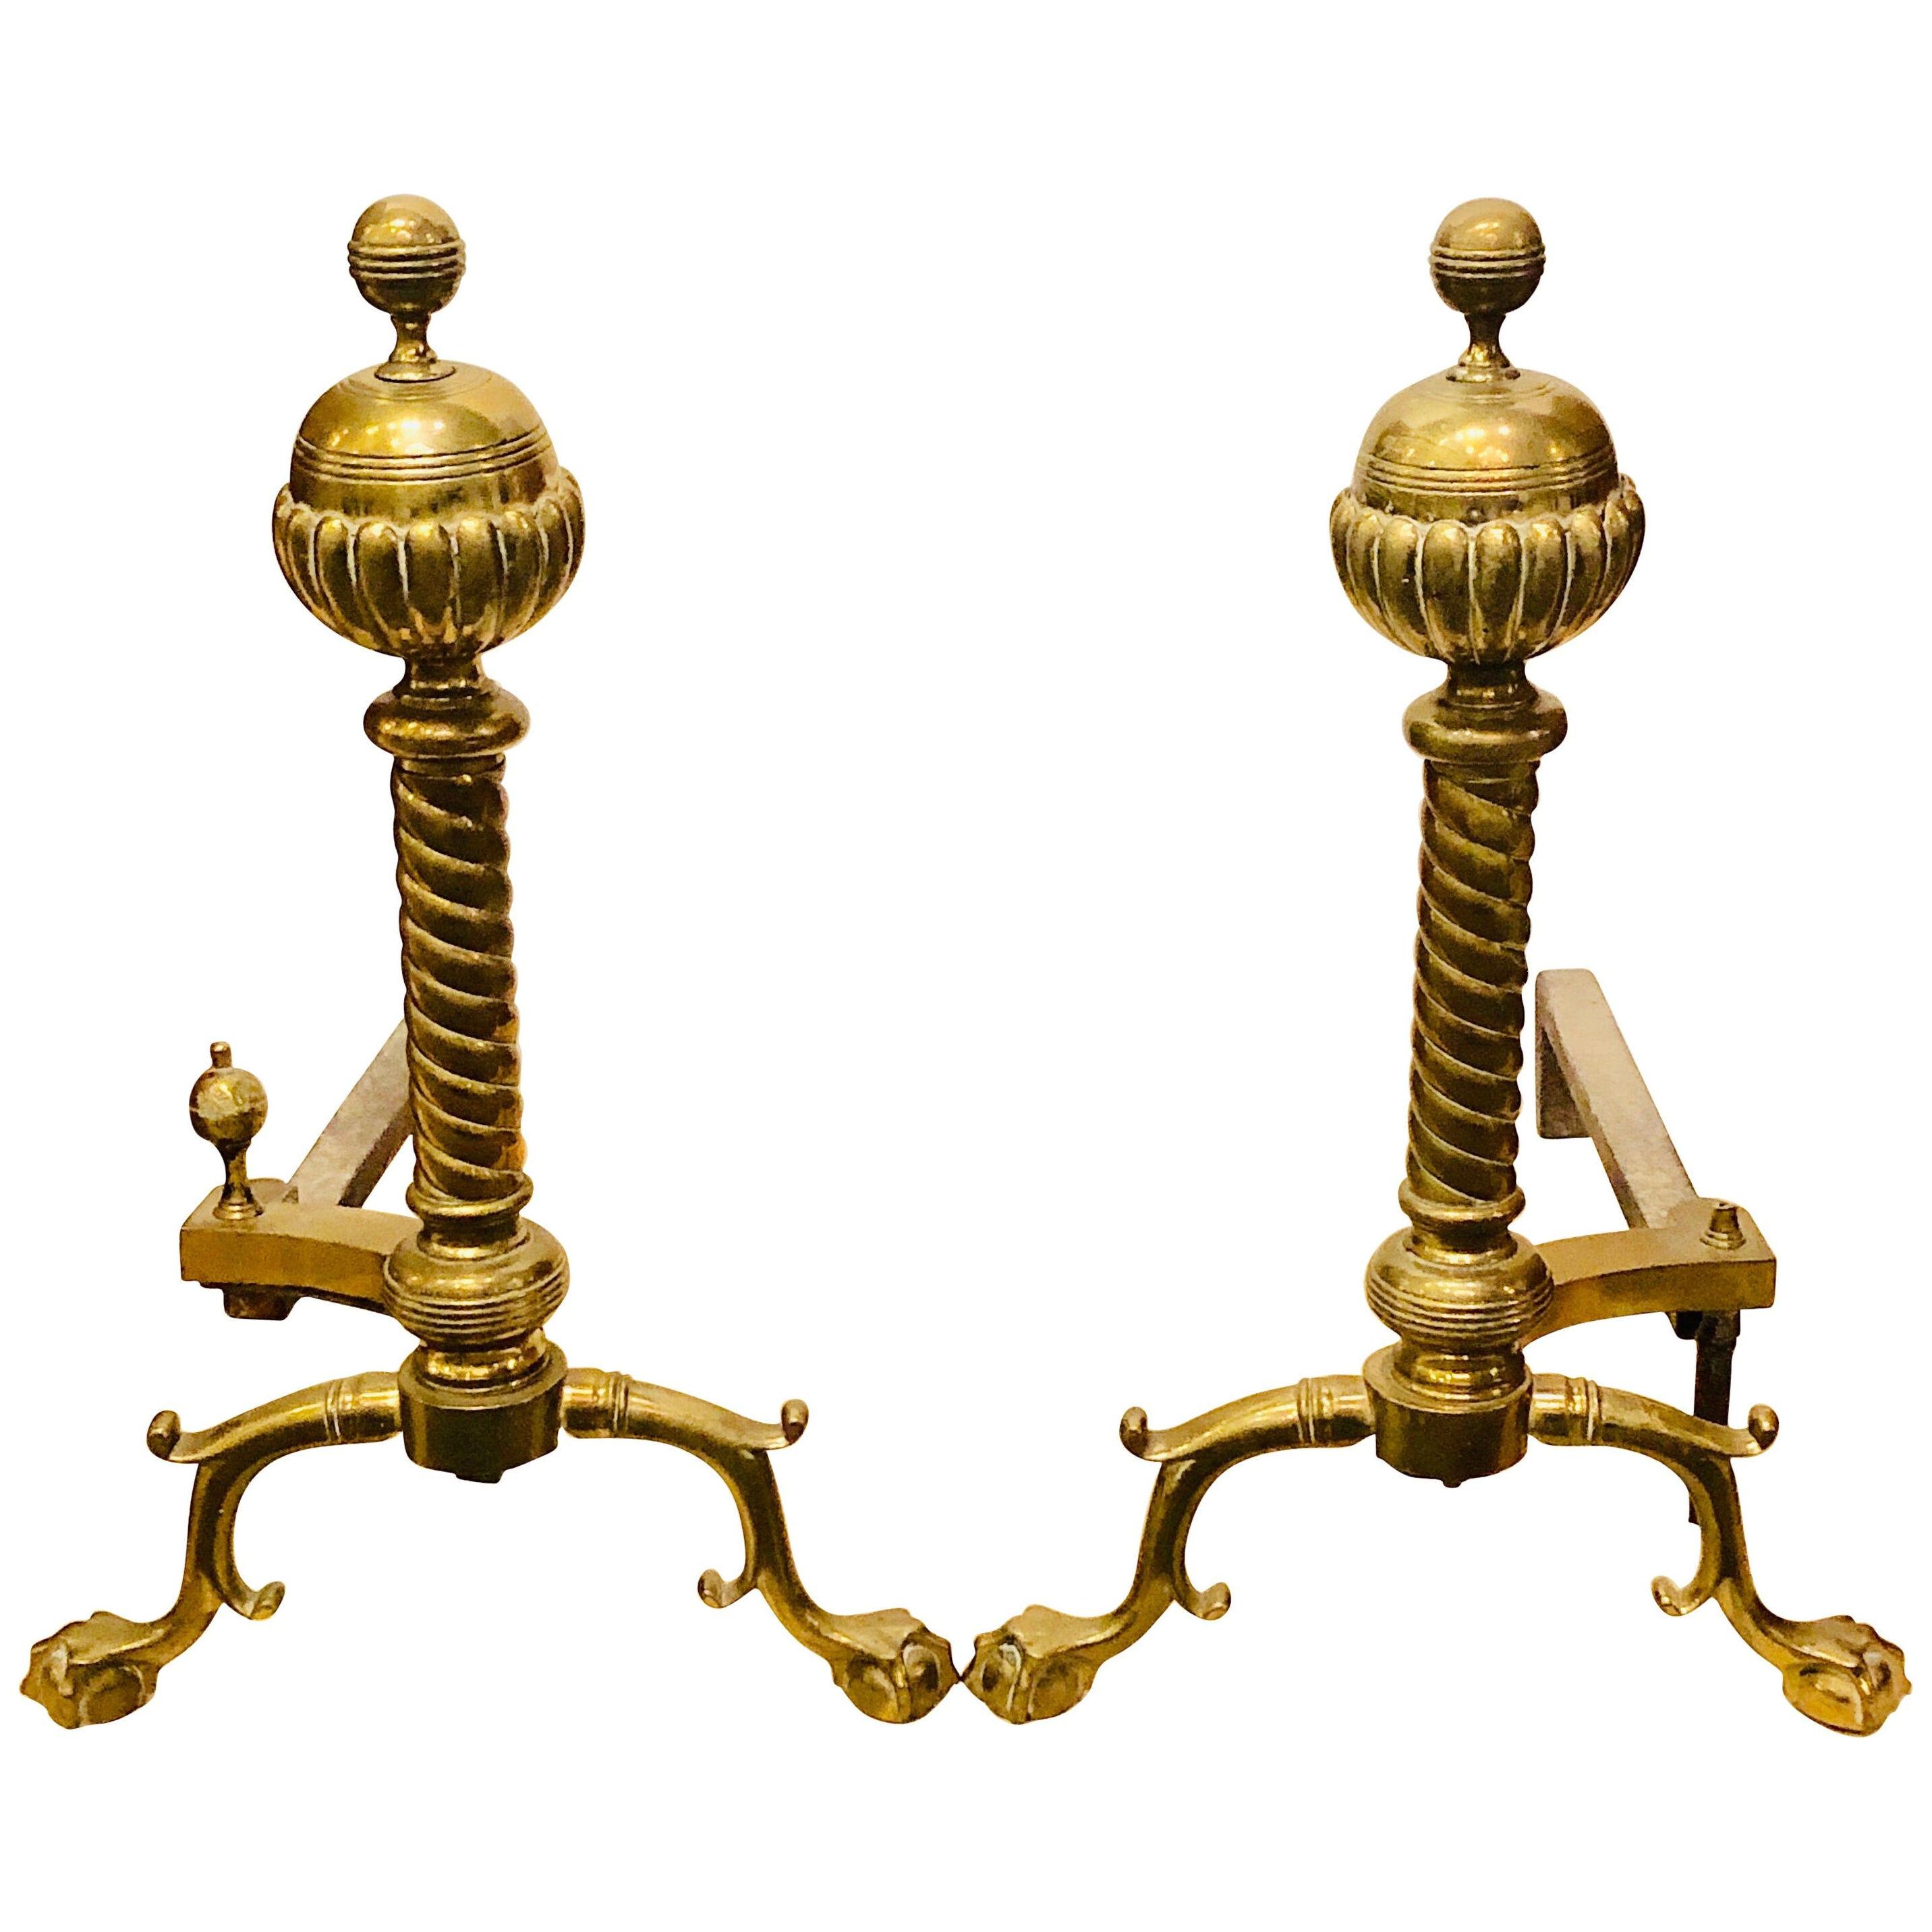 Pair of Brass Andirons circa 1880 Ball and Claw Feet of Twisted Column Form